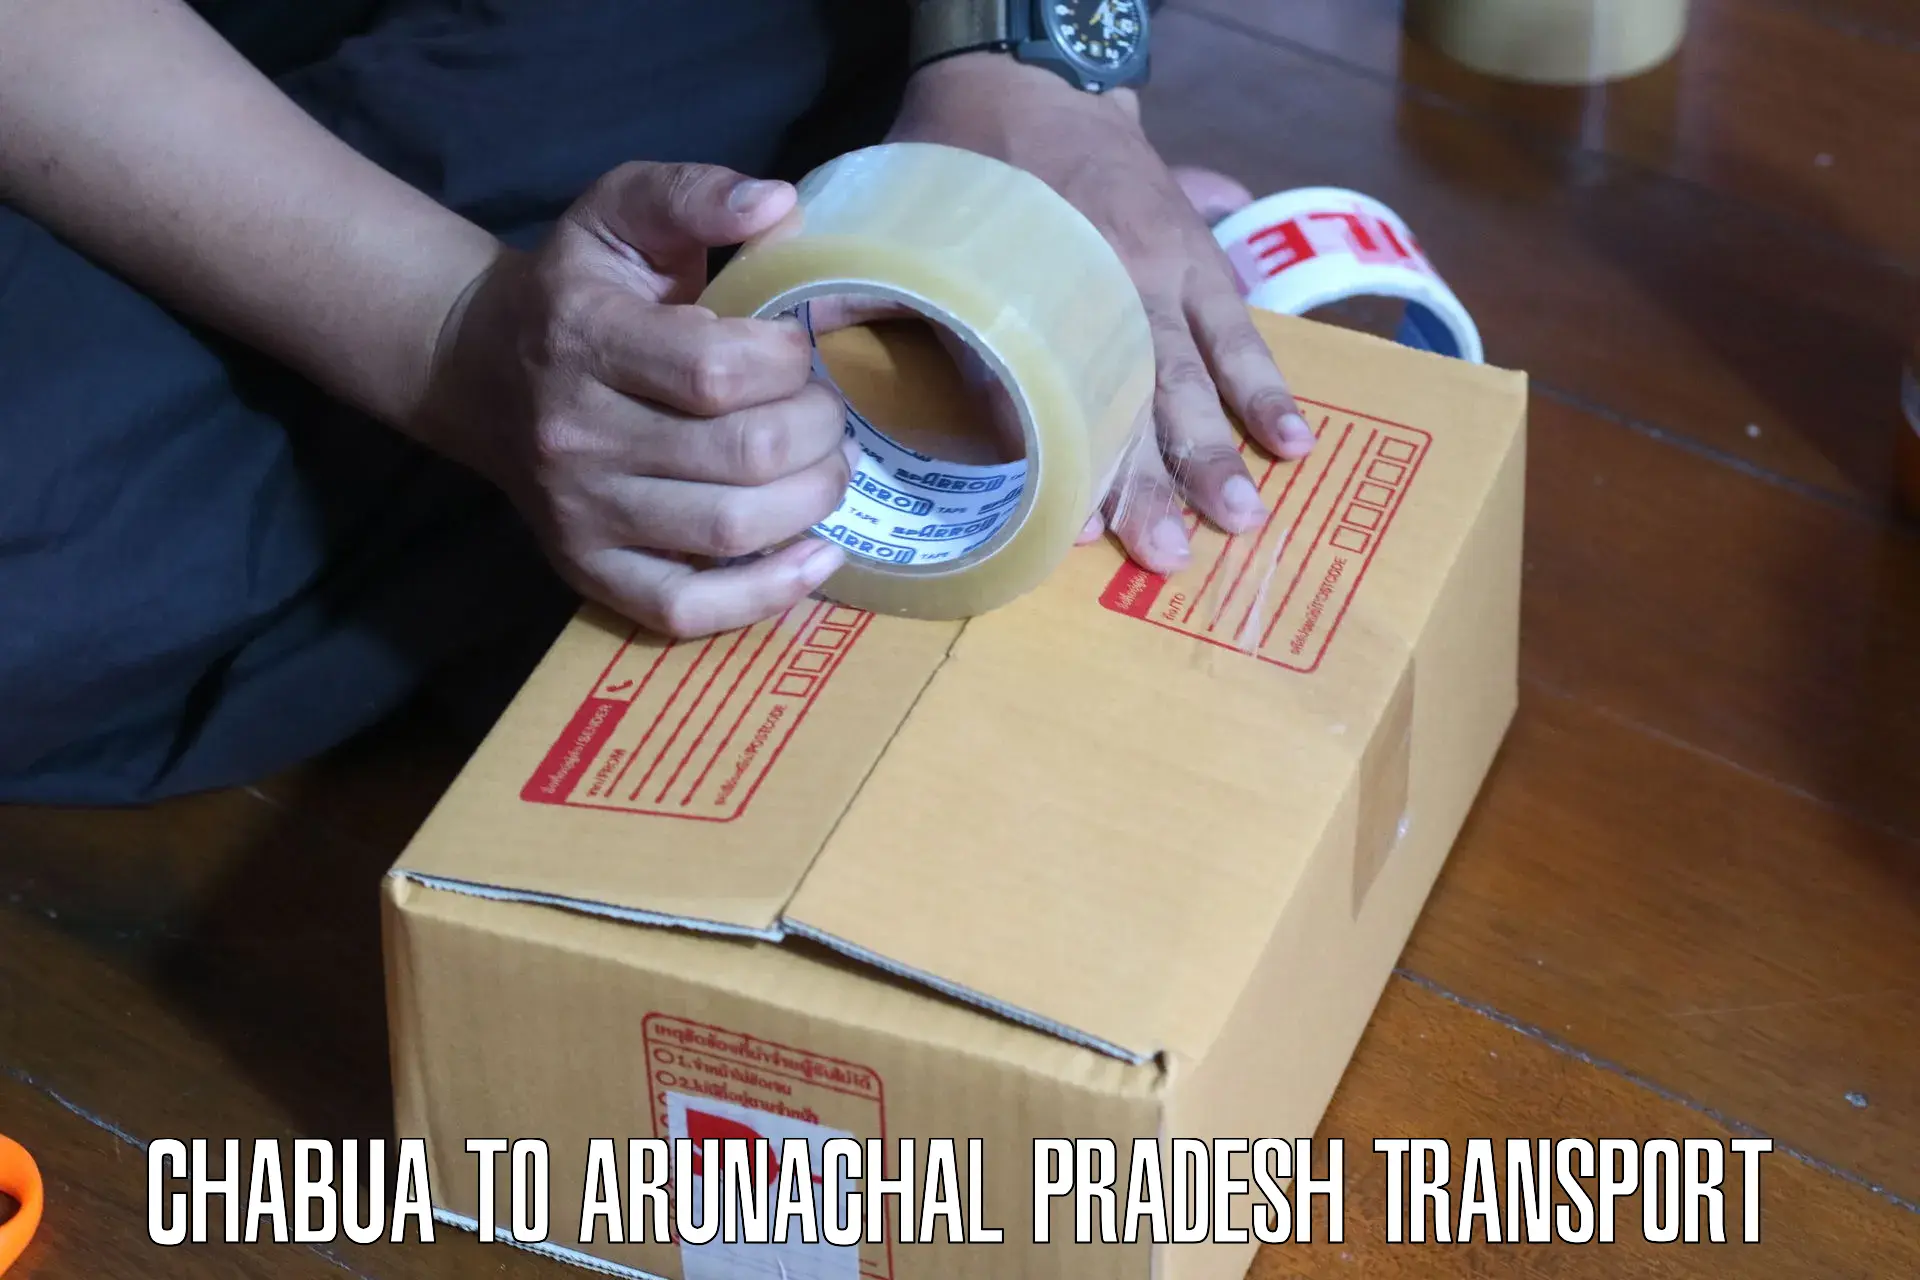 Part load transport service in India Chabua to Dirang